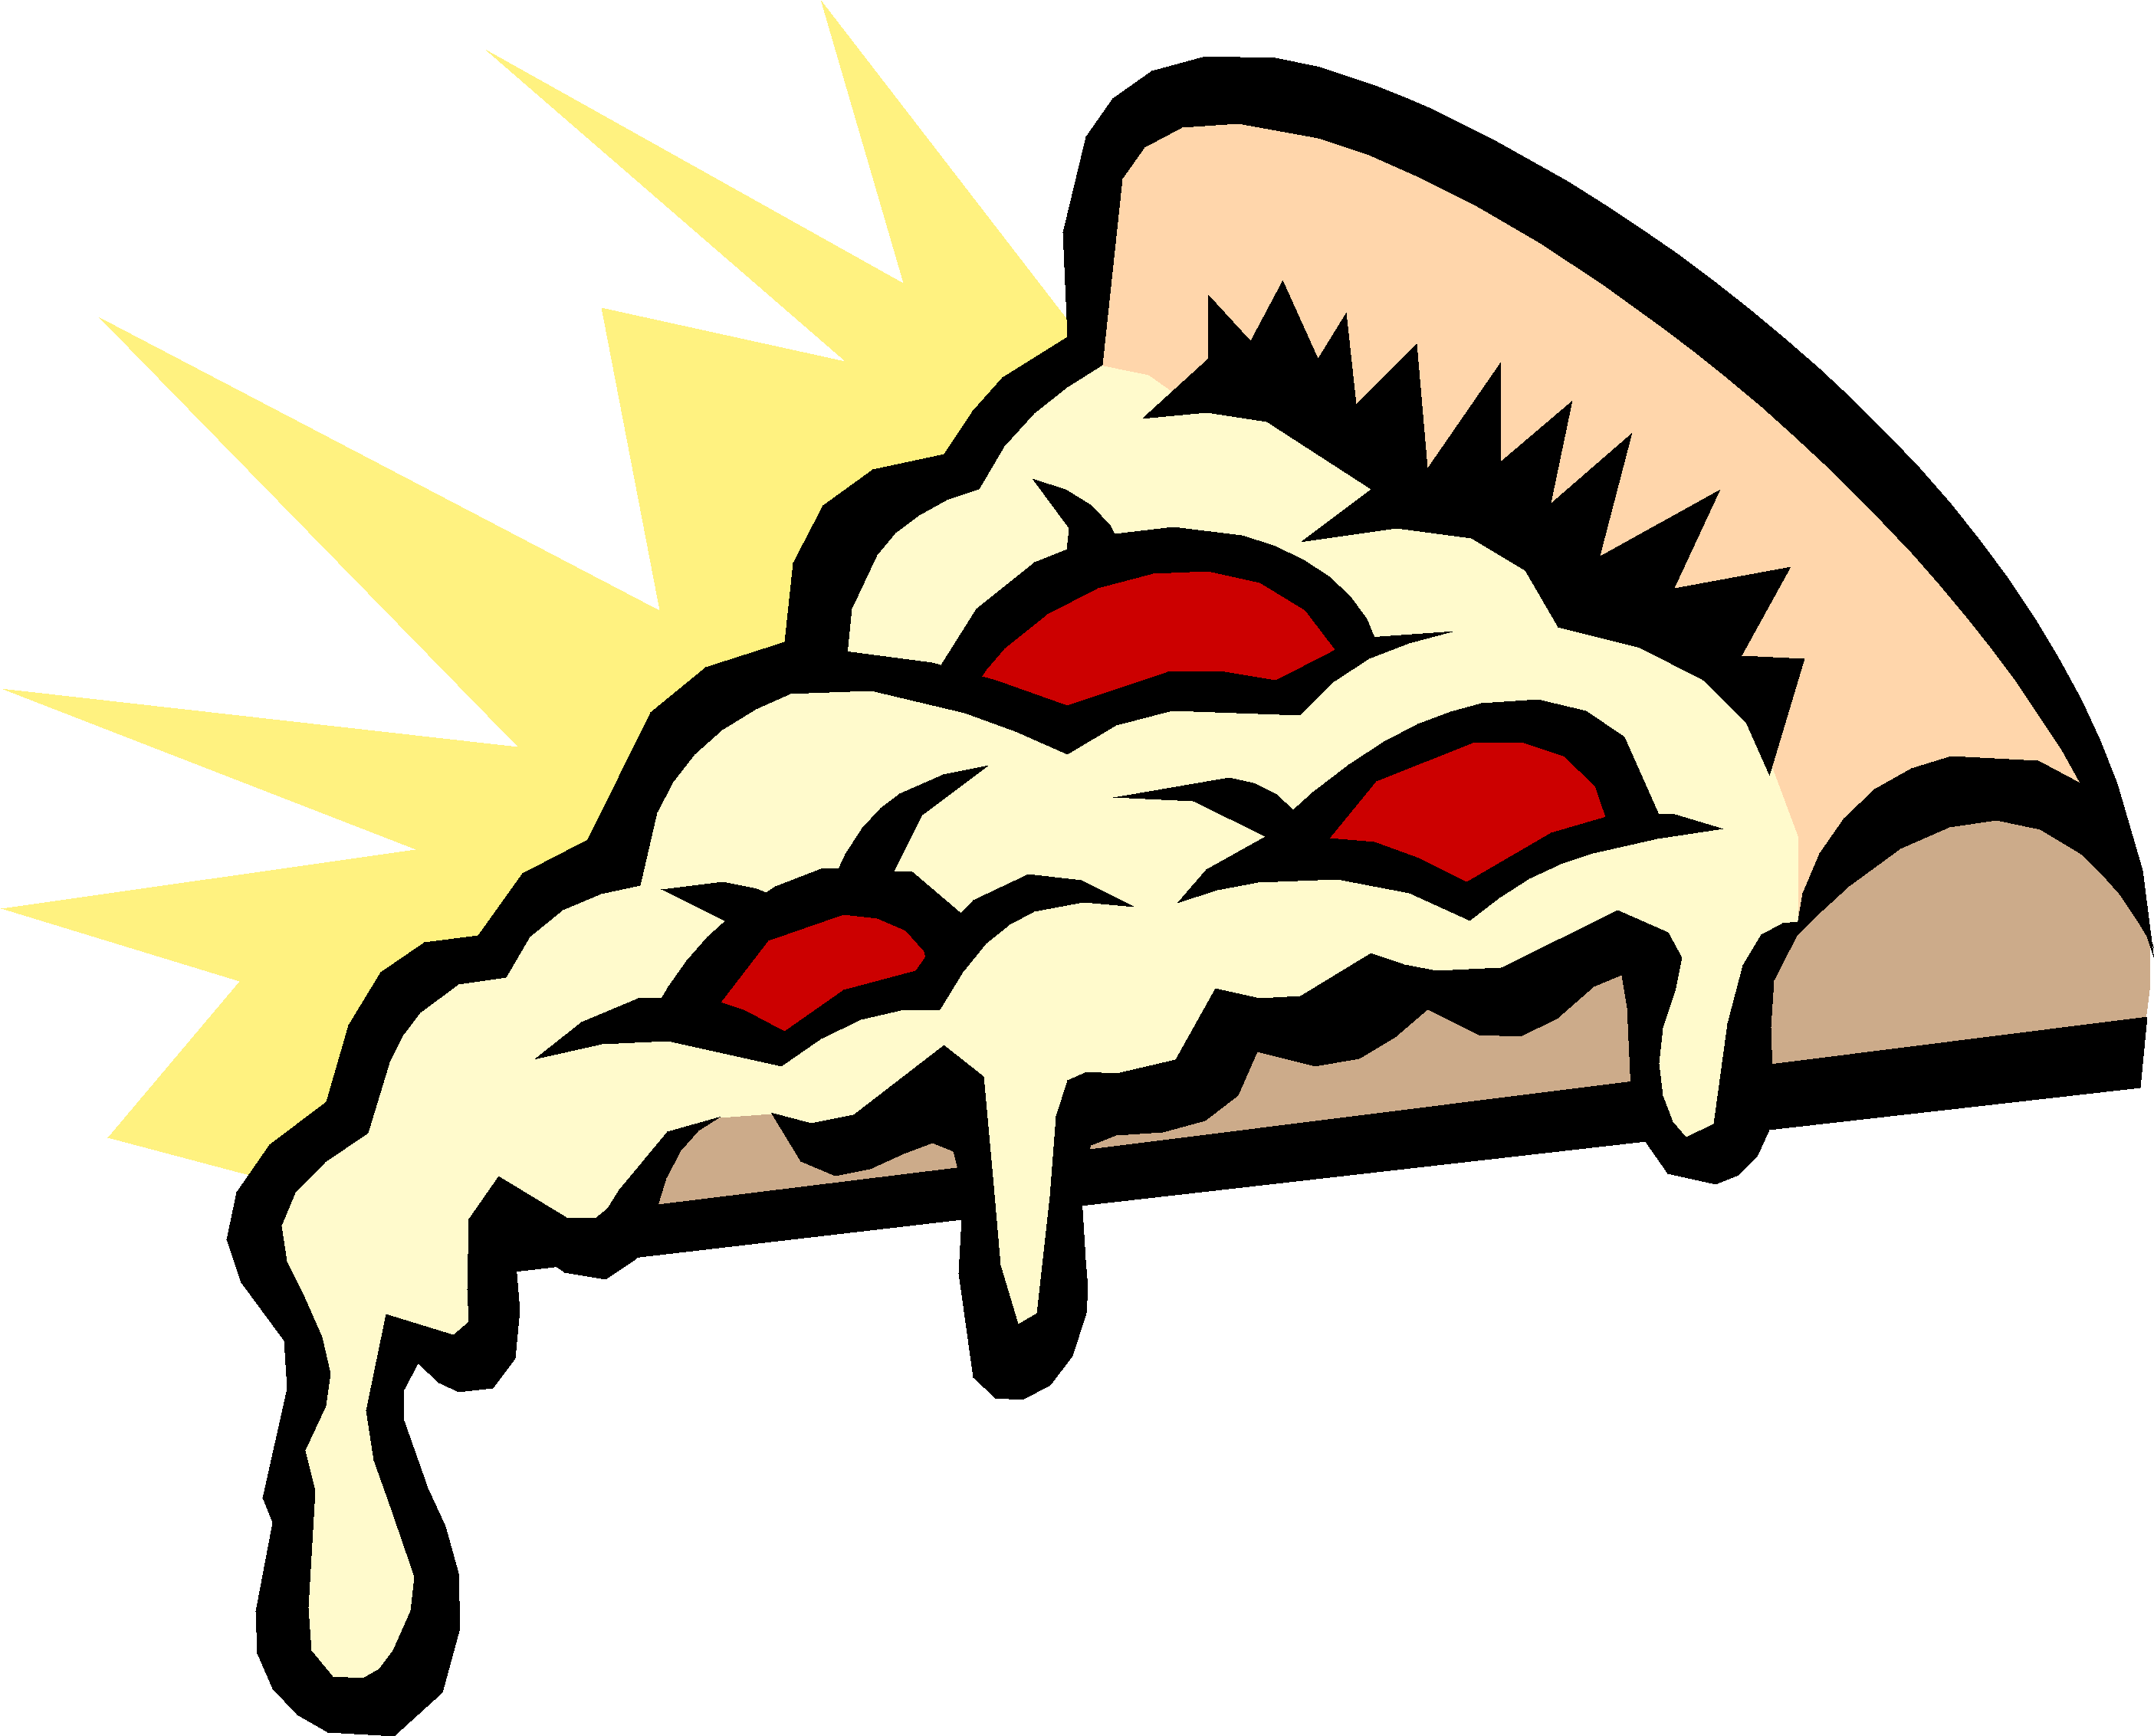 Pizza My Favorite Food Clipart.